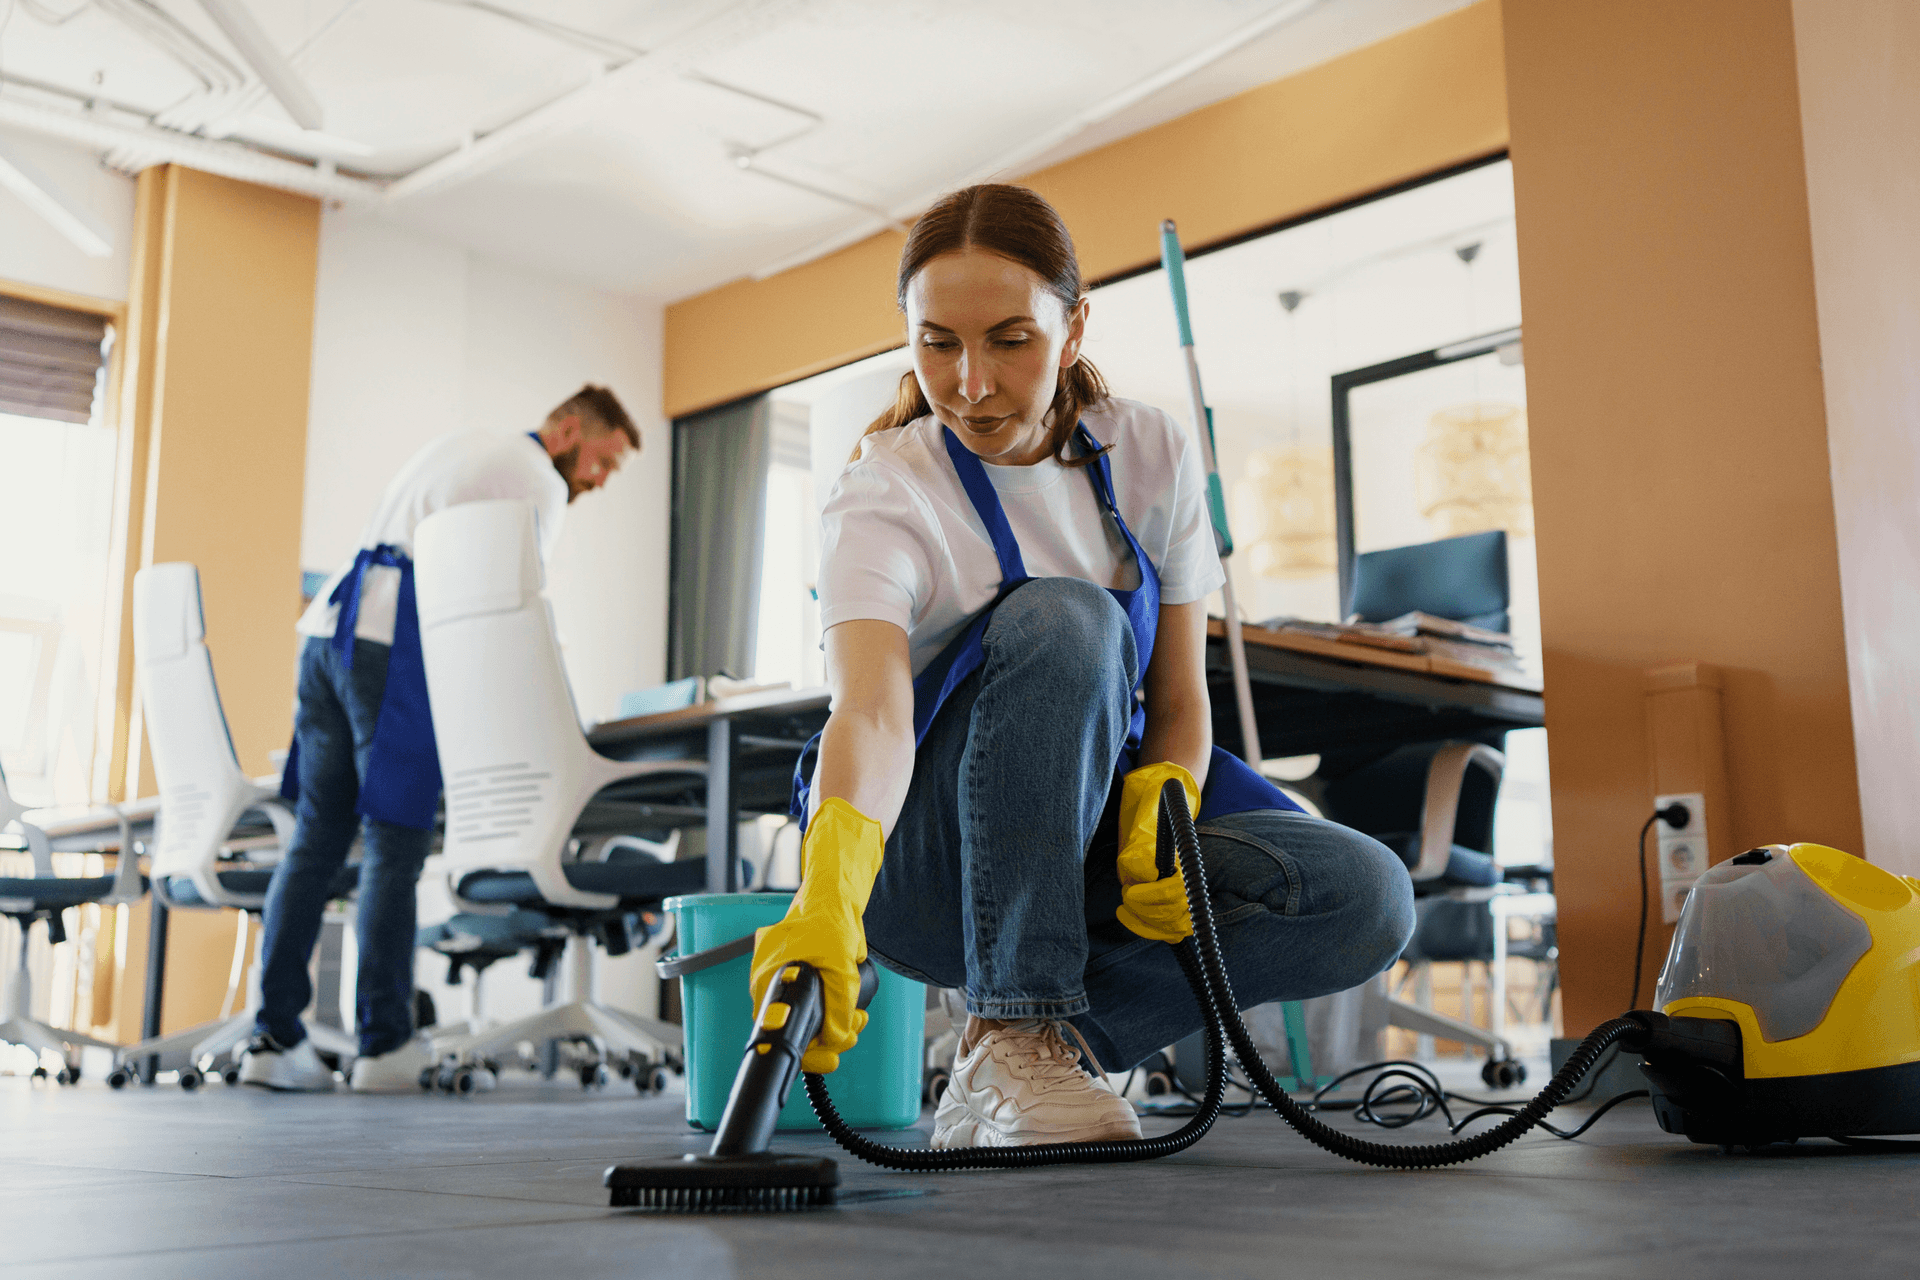 A team of professional commercial cleaners providing quality cleaning services for businesses